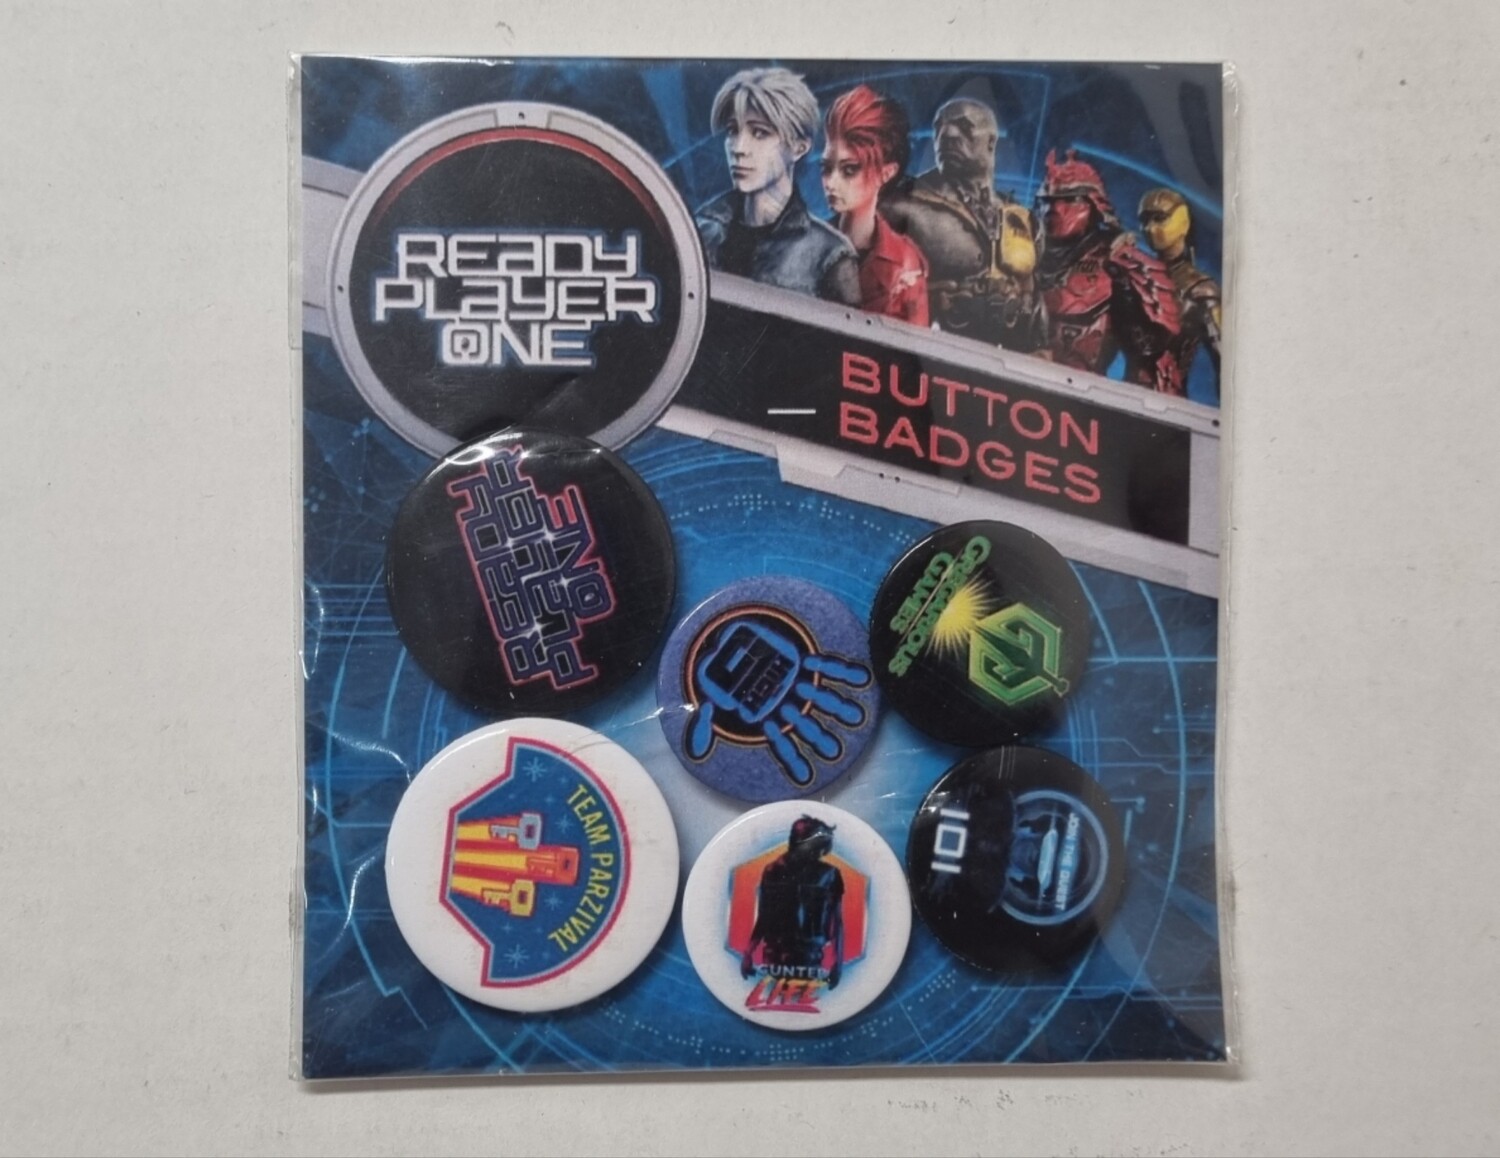 Button Badges, Ready Player one